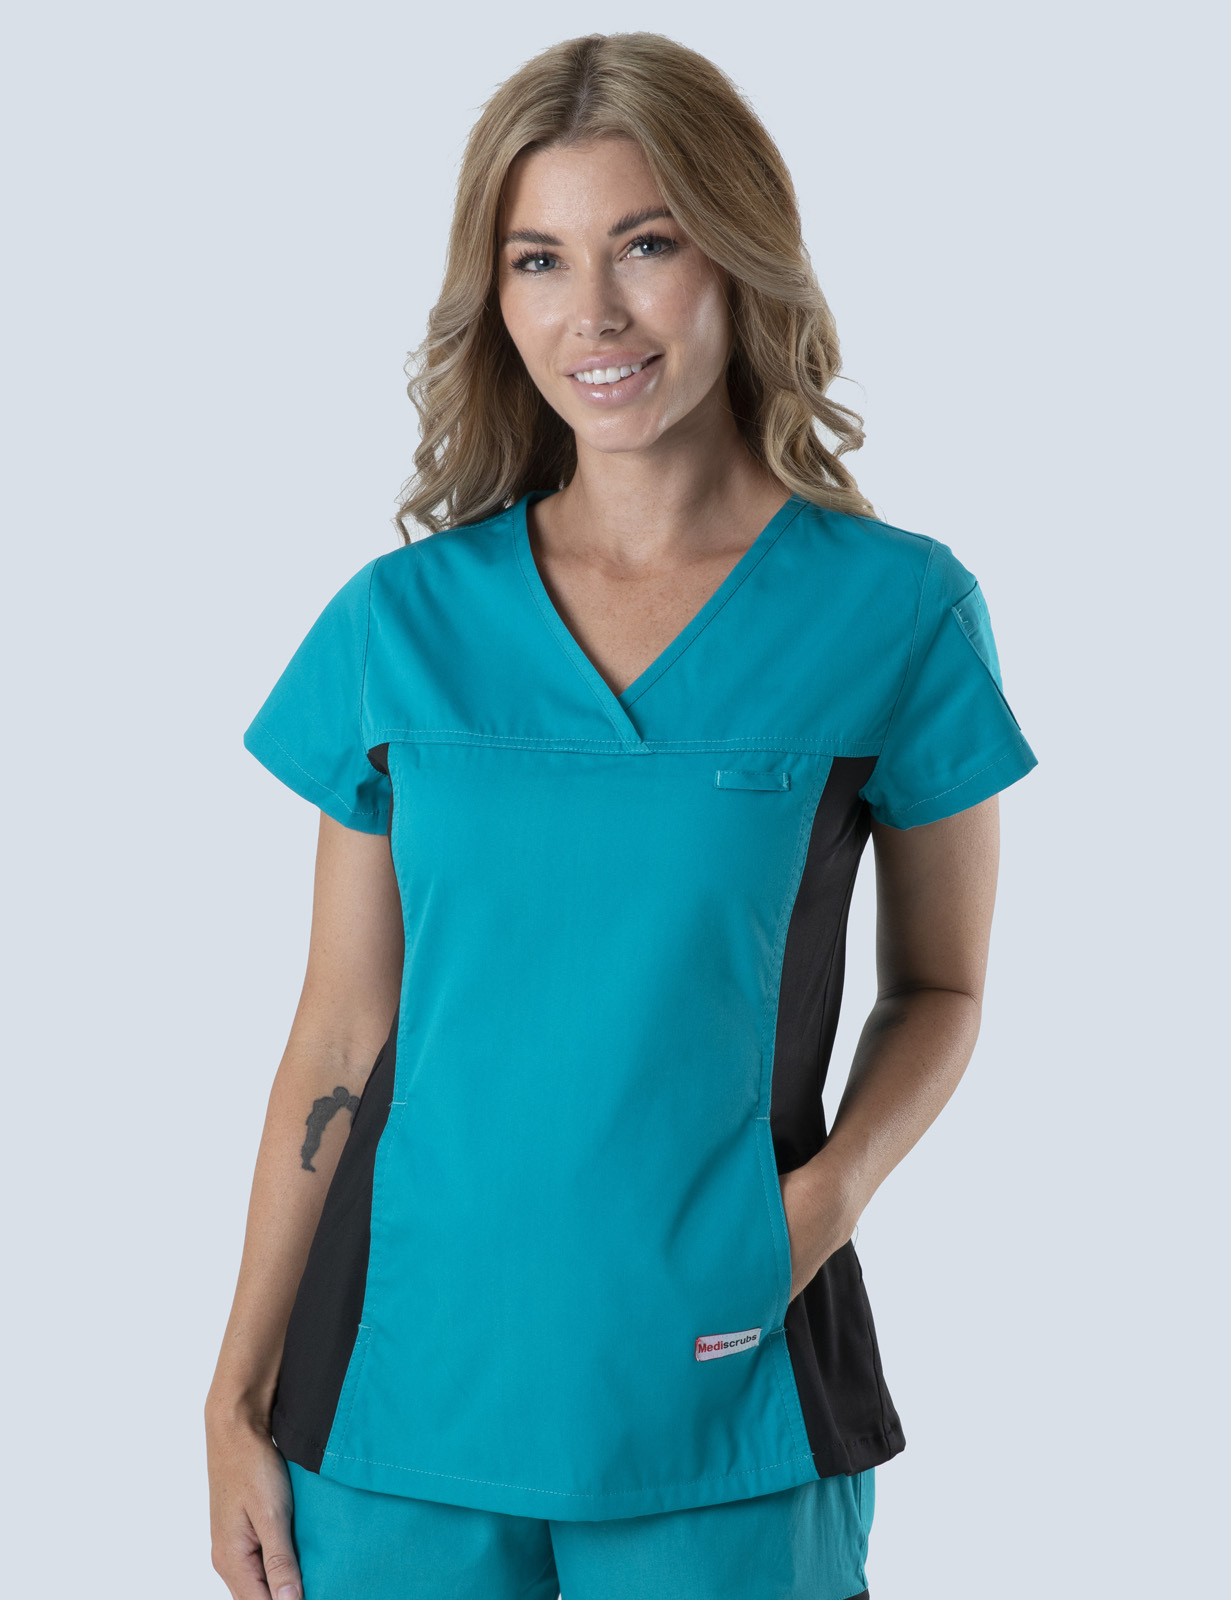 Metro South Oral Health - Dental Assistants (Women's Fit Spandex Scrub Top in Teal incl Logos)